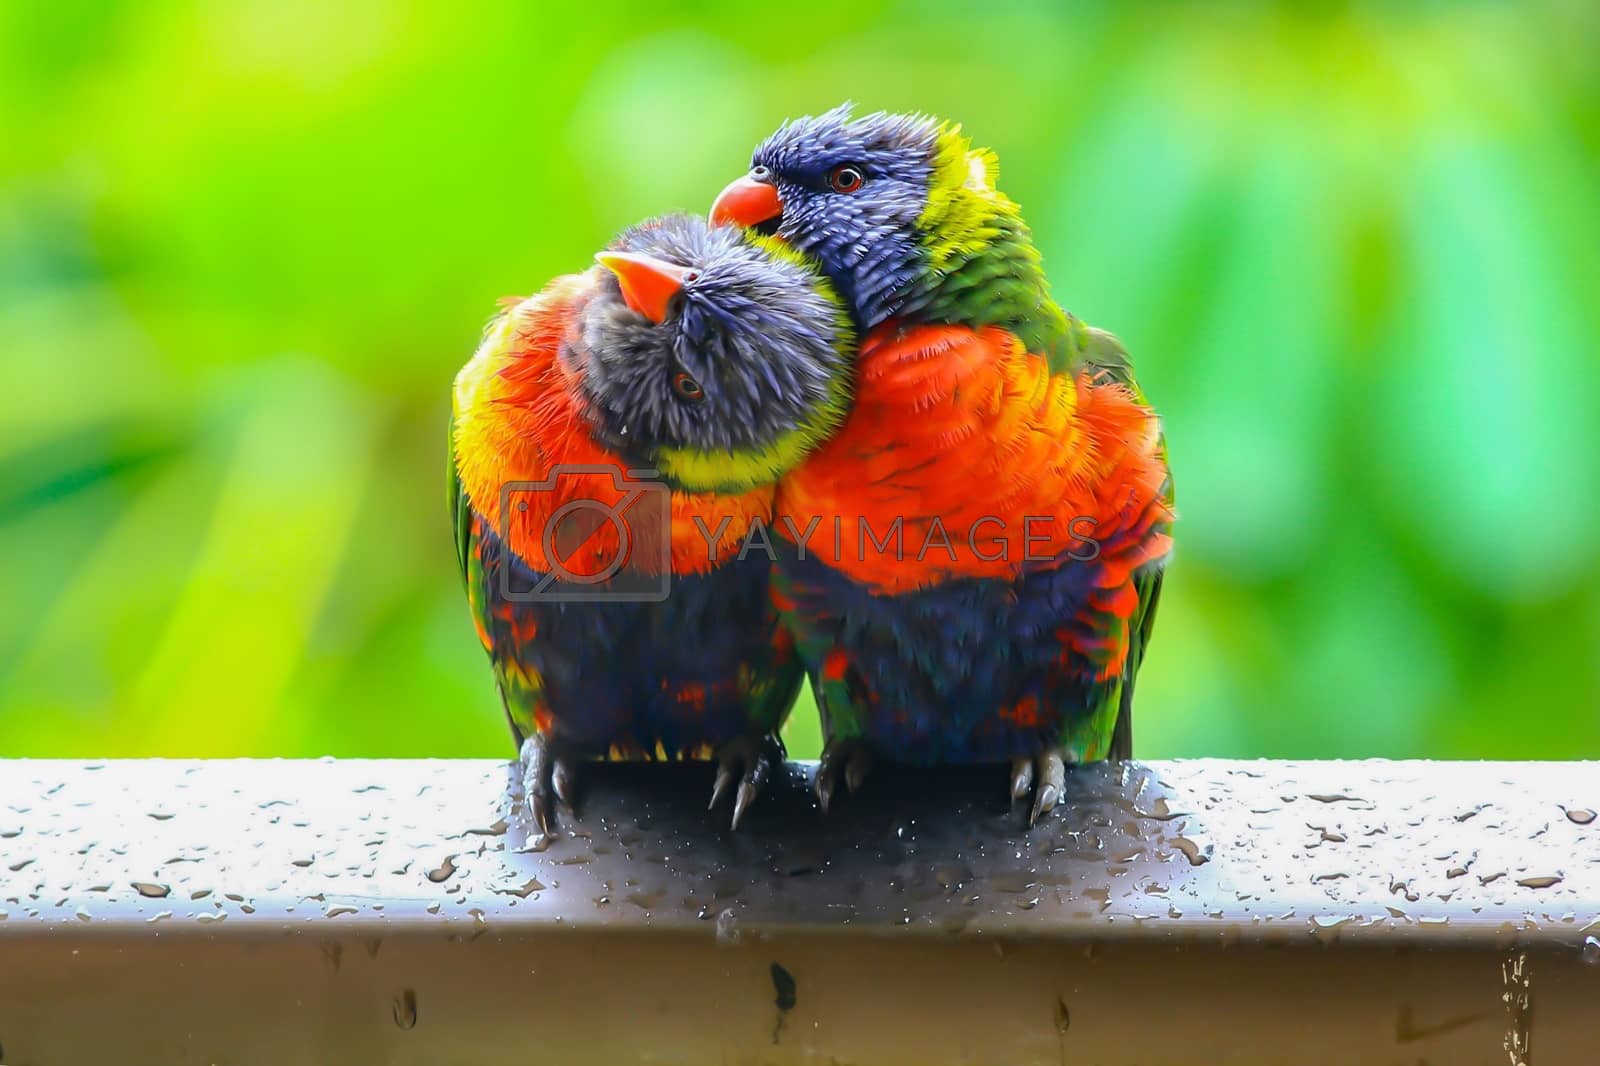 Royalty free image of Rainbow lorikeets preening each other after the rain by blueandrew8000@hotmail.com